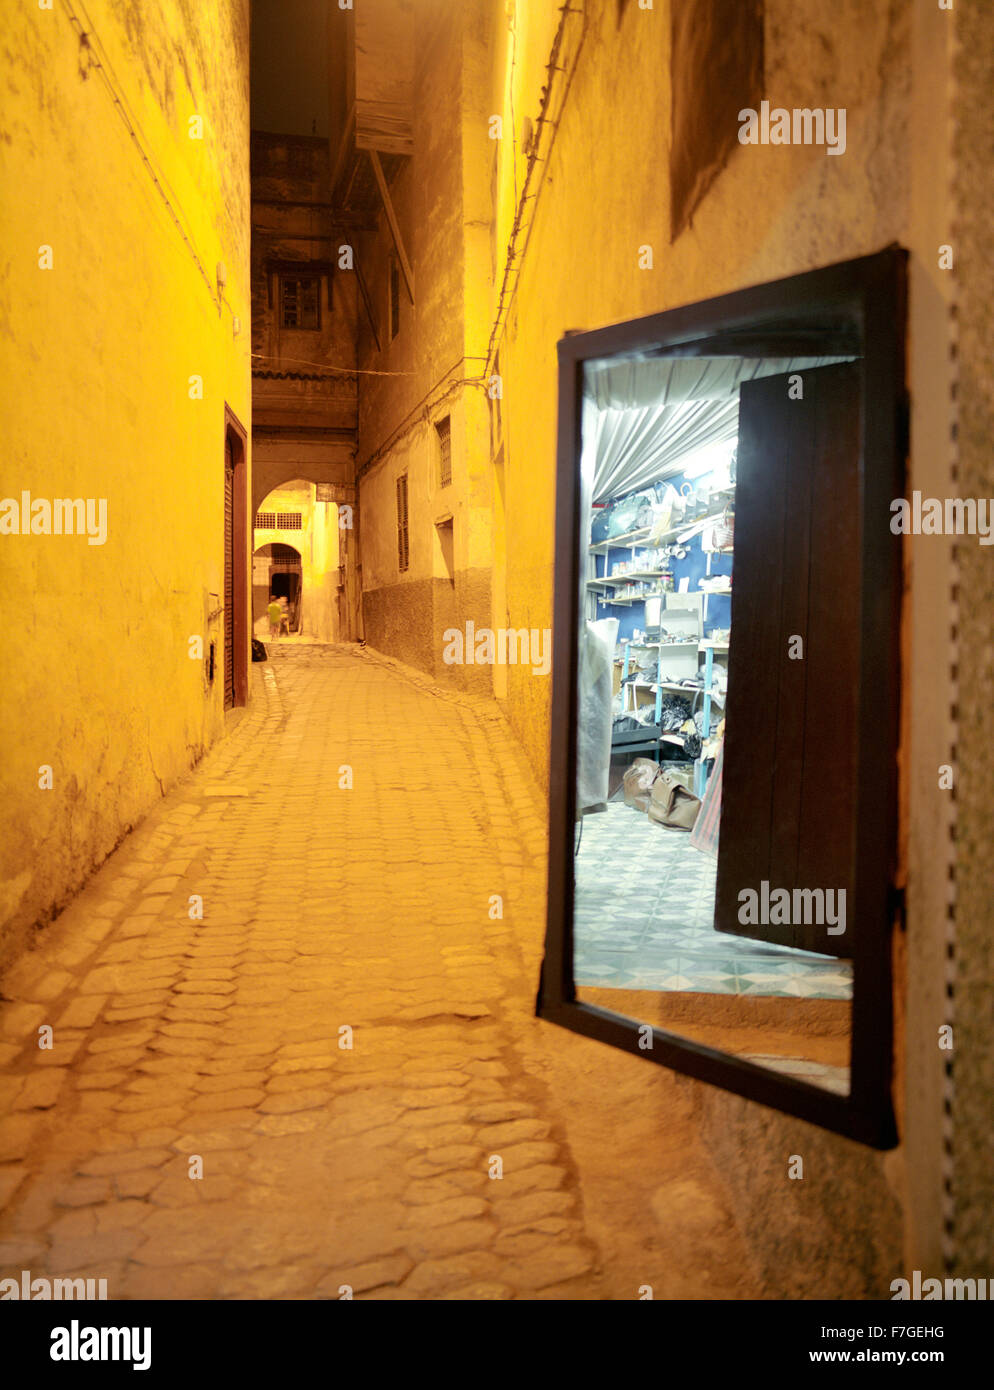 A mirror reflects a merchants store. In an alleyway in the Fes al Bali medina. Fes, Morocco, North Africa. Stock Photo